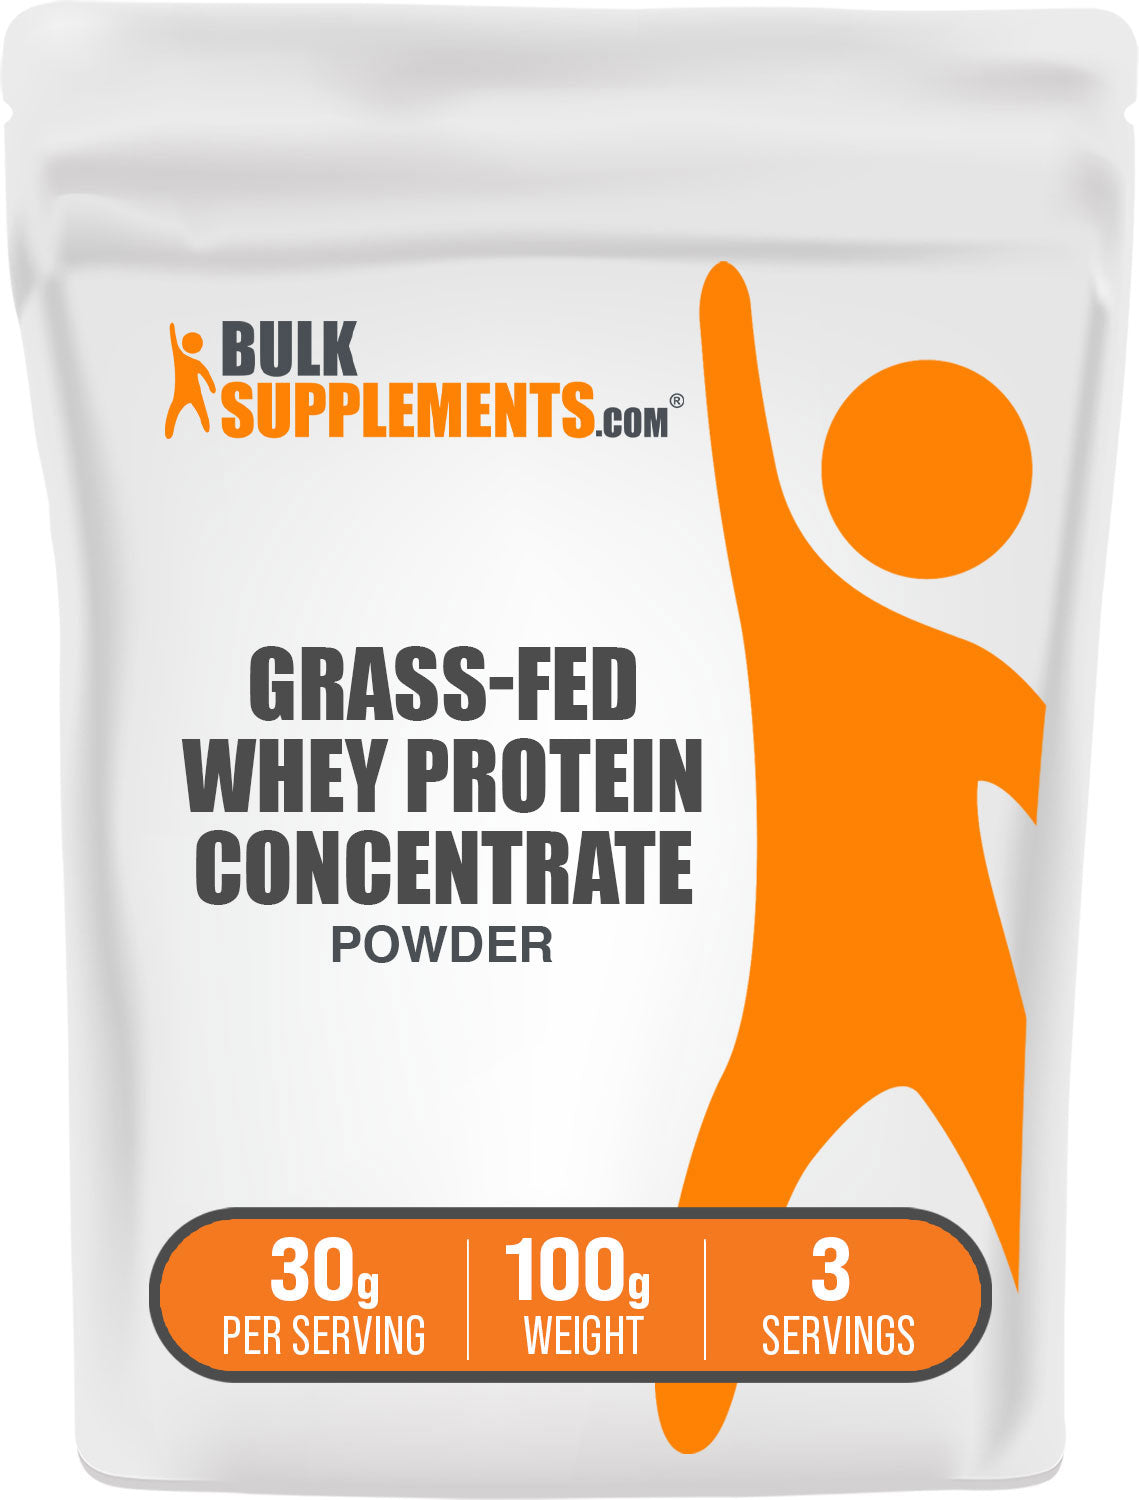 Grass-Fed Whey Protein 100g